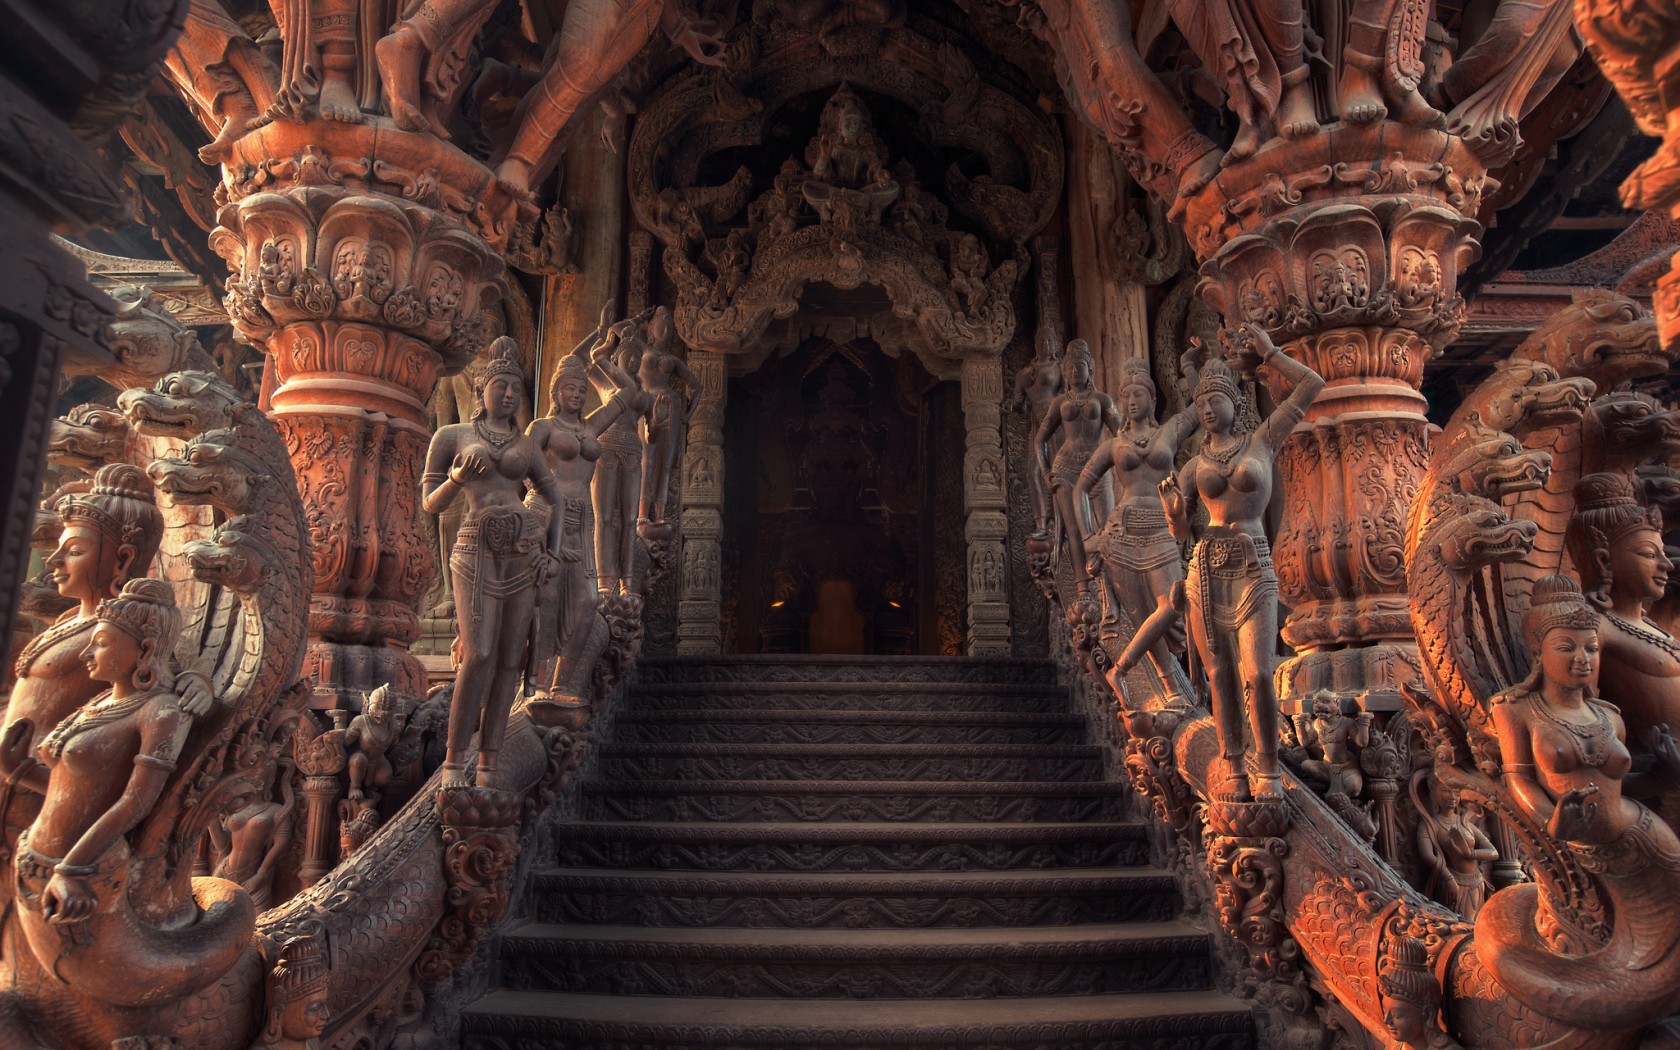 architecture, Interiors, Staircase, HDR, India, Religions, Sculpture, Women, Dragon, Door Wallpaper